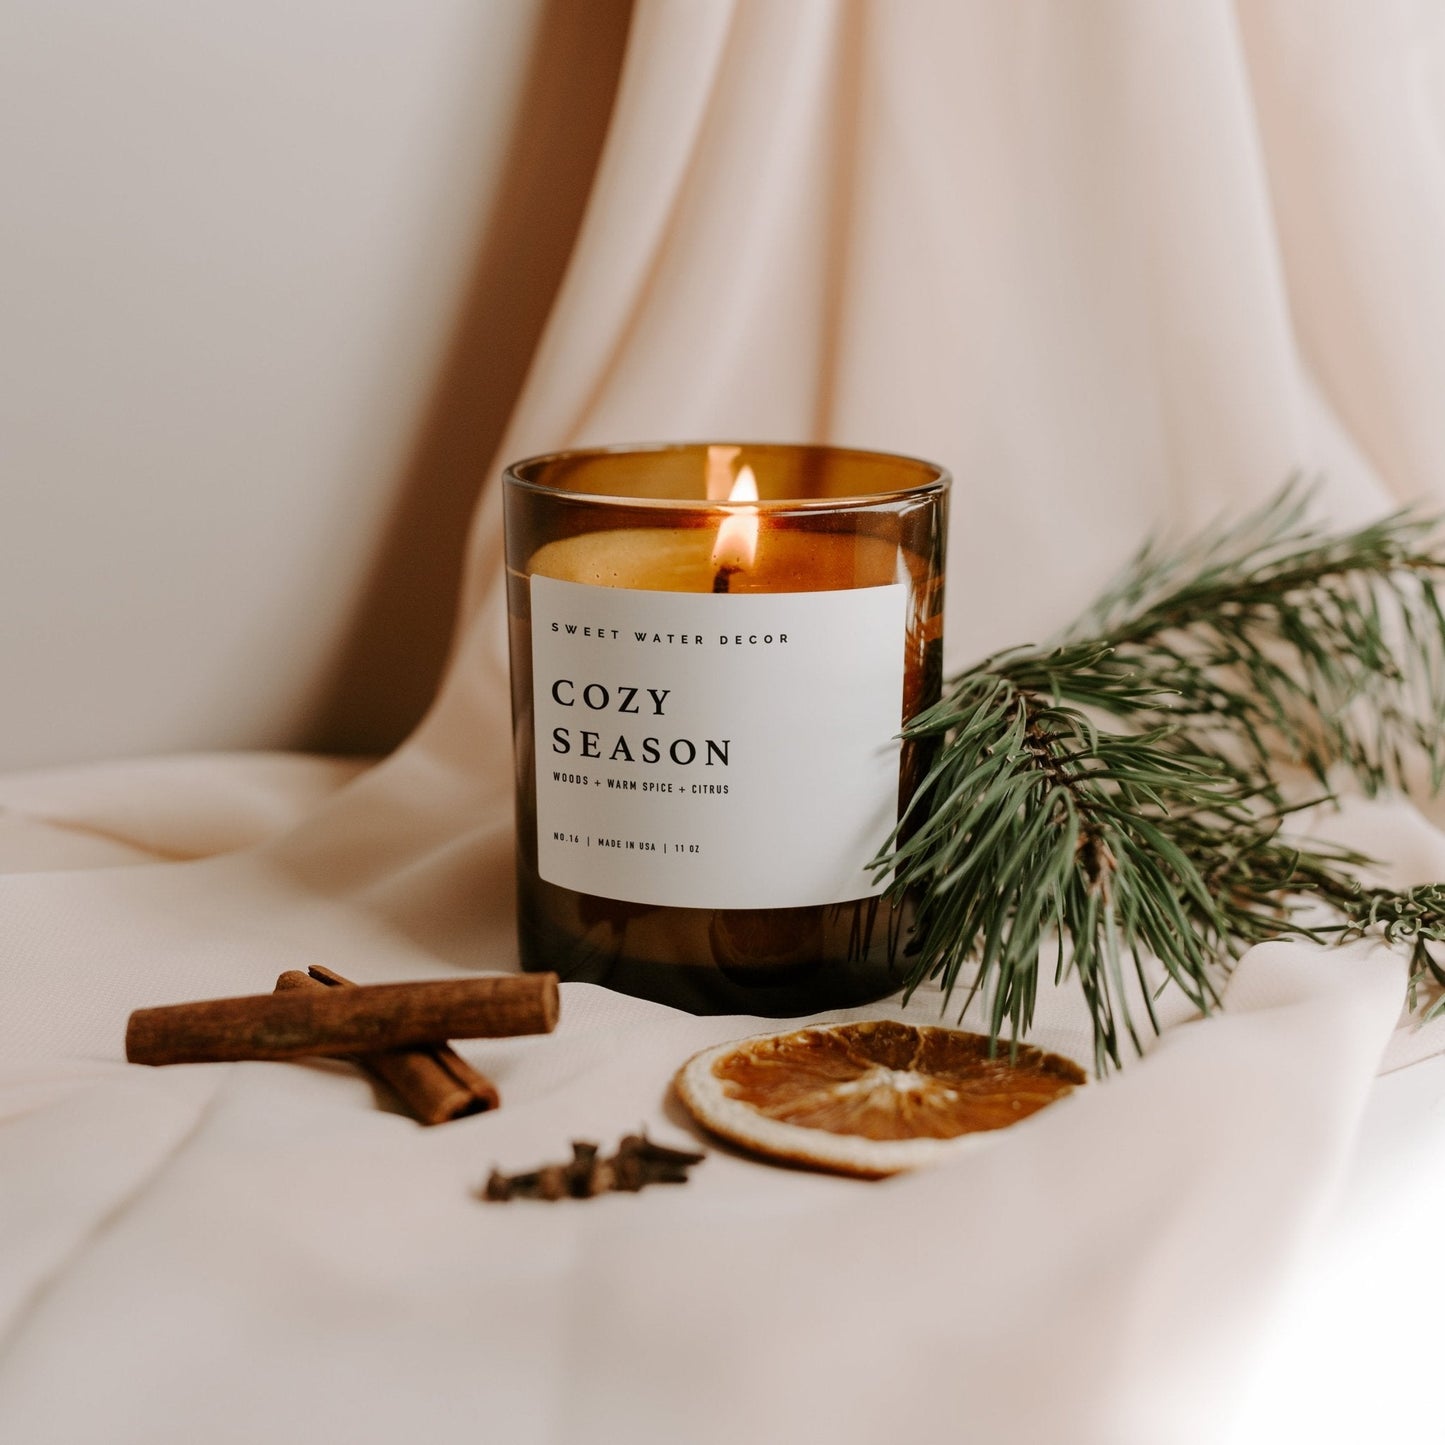 Cozy Season Soy Candle - Amber Jar - 11 oz by Sweet Water Decor